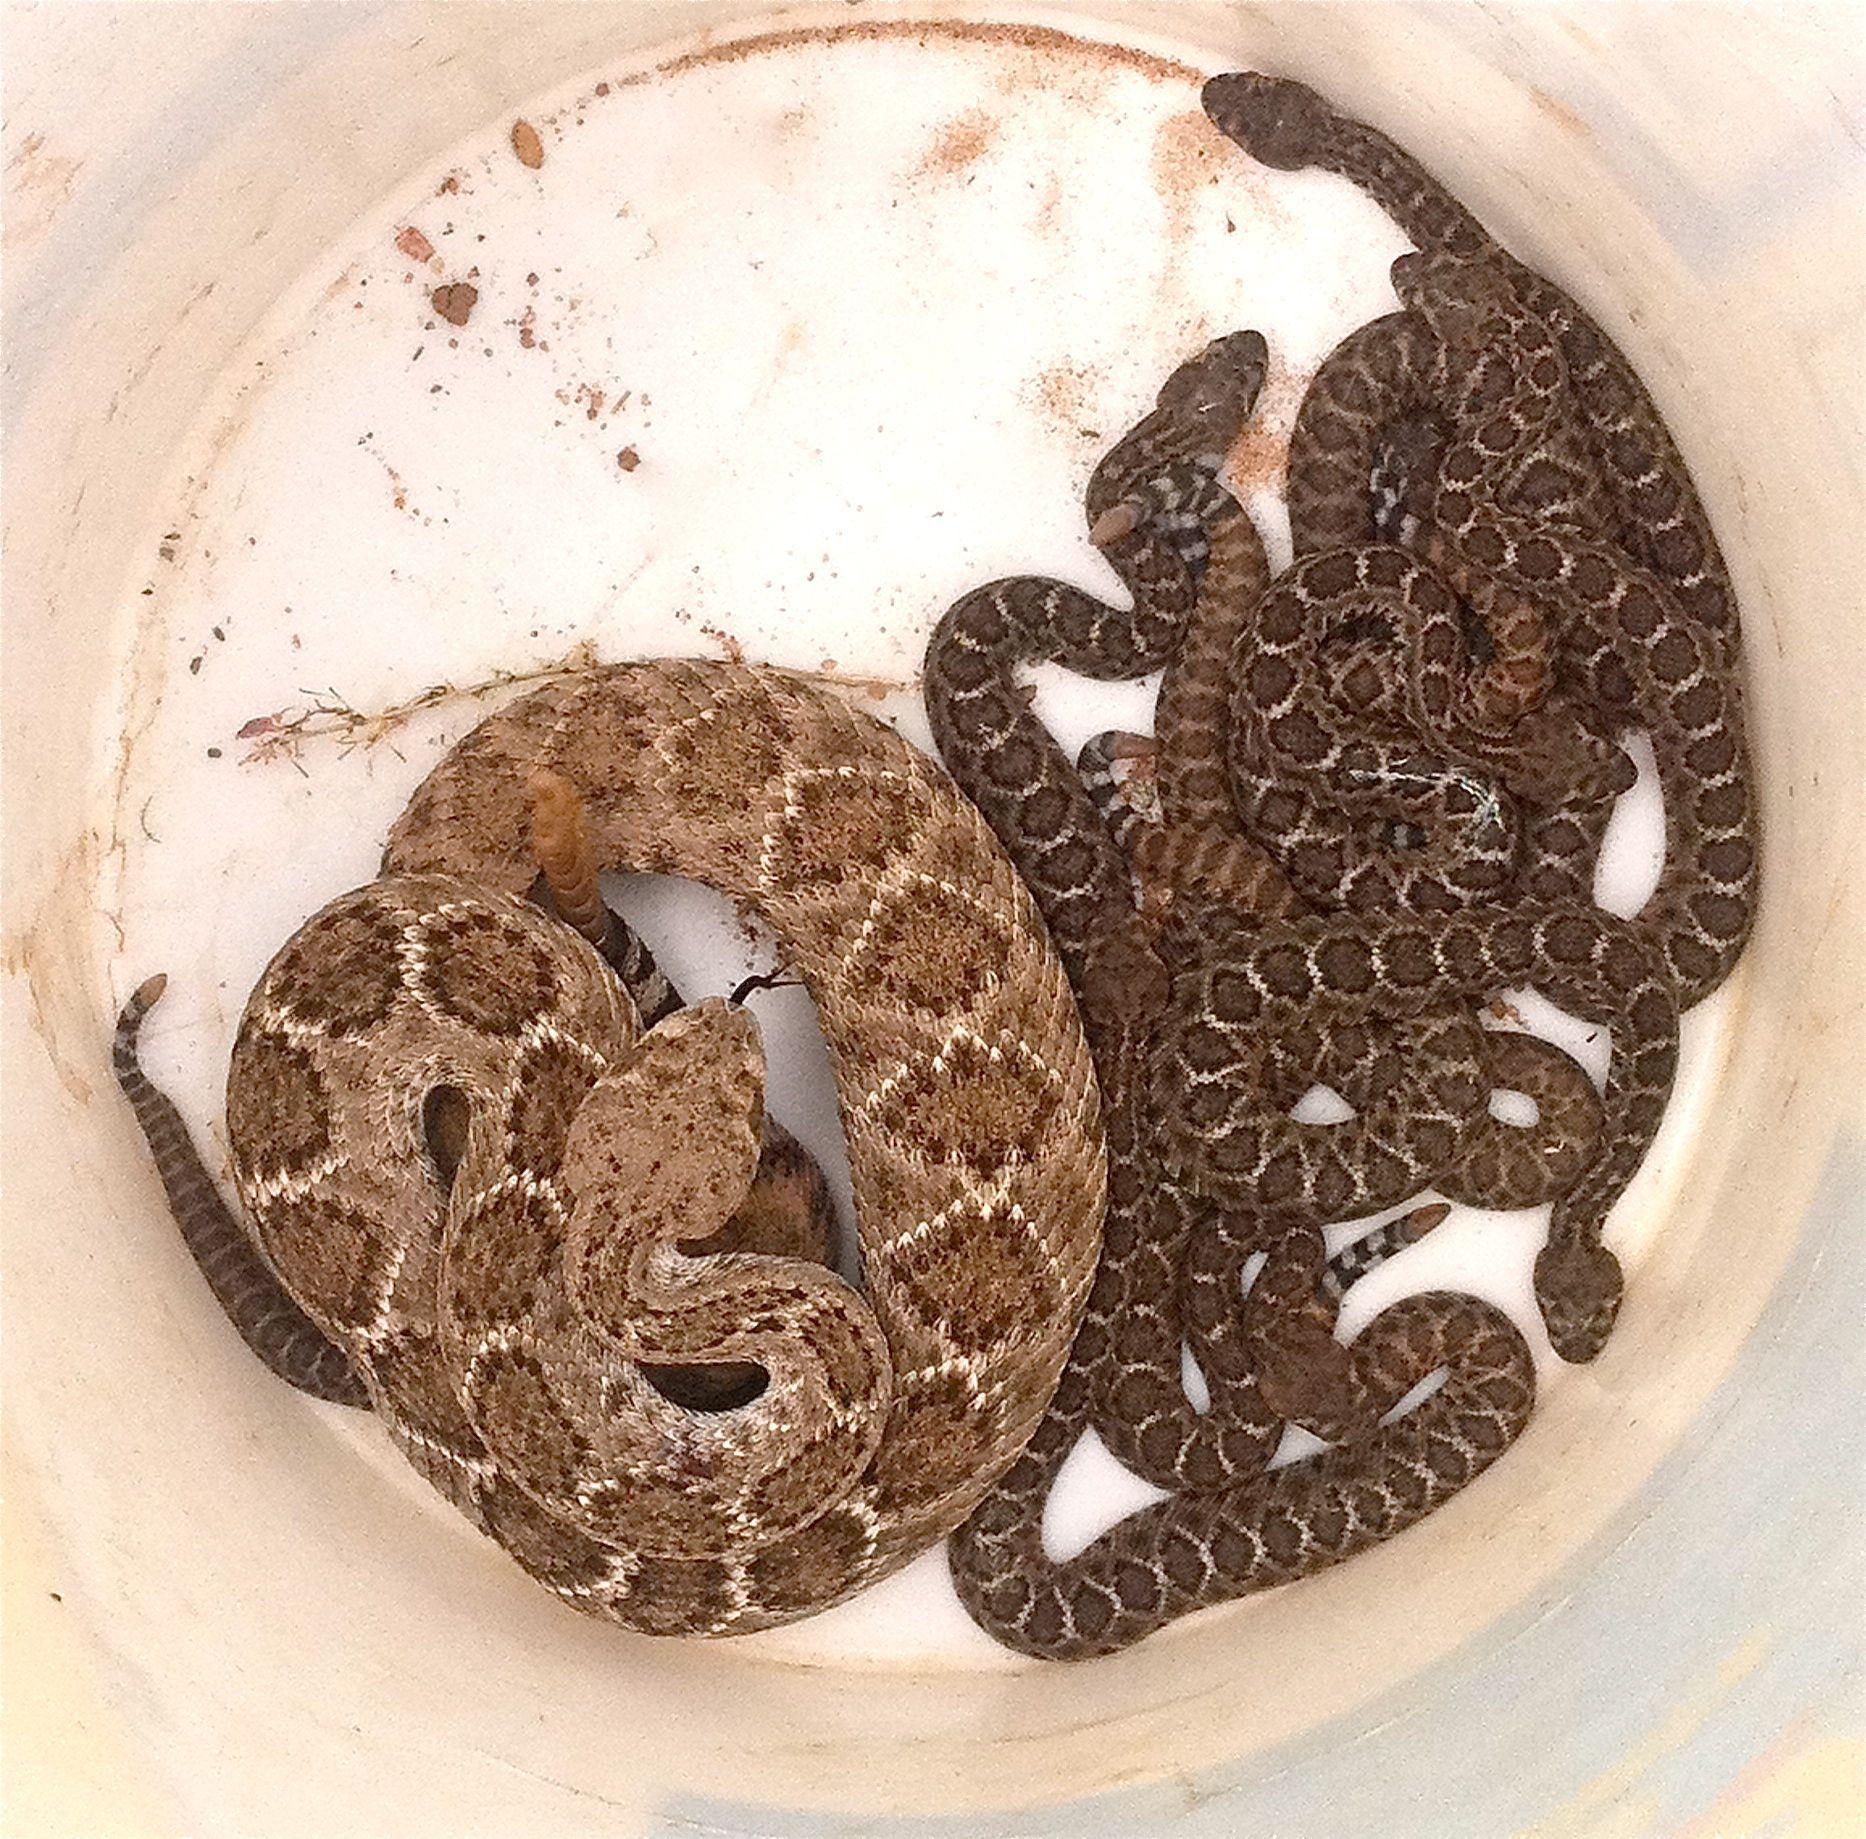 Fact About Rattlesnake and Their Babies